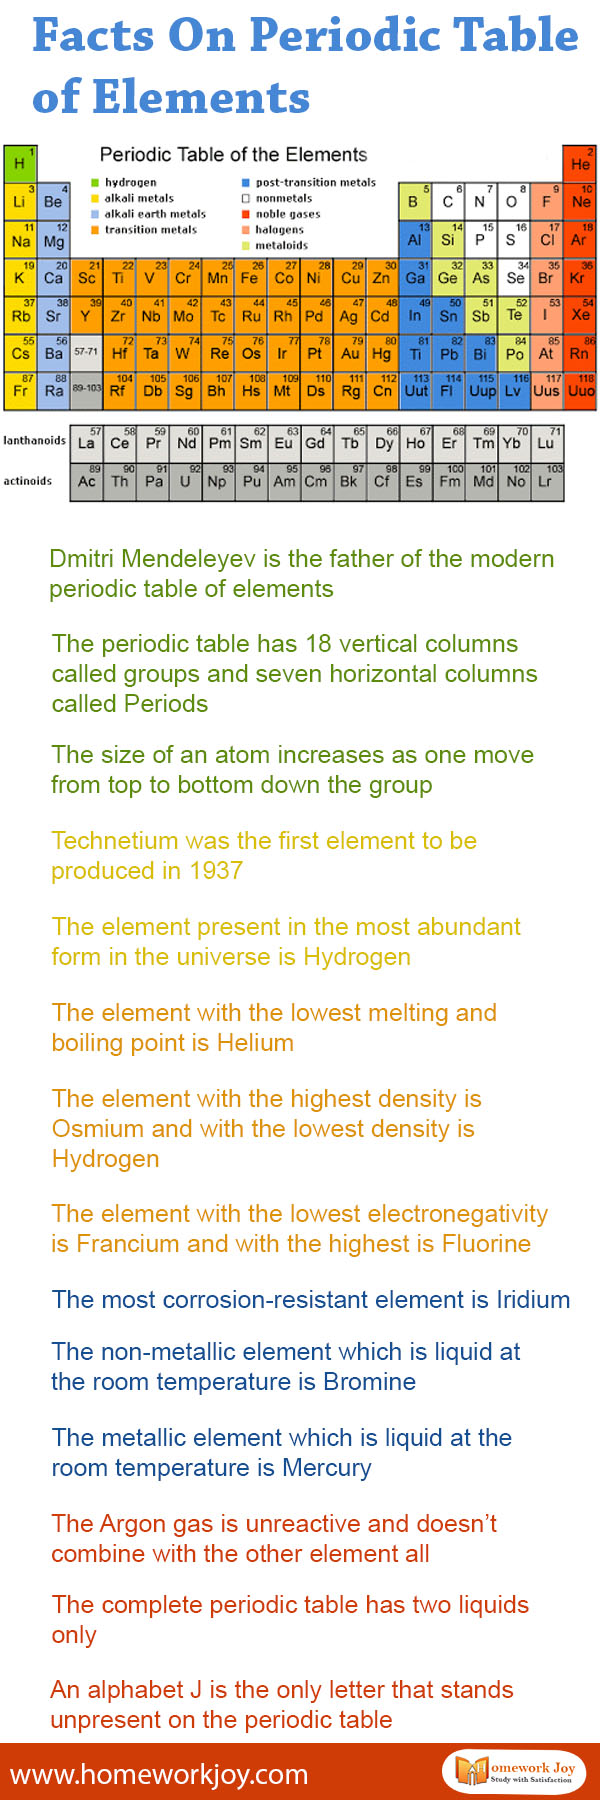 Facts On Periodic Table of Elements